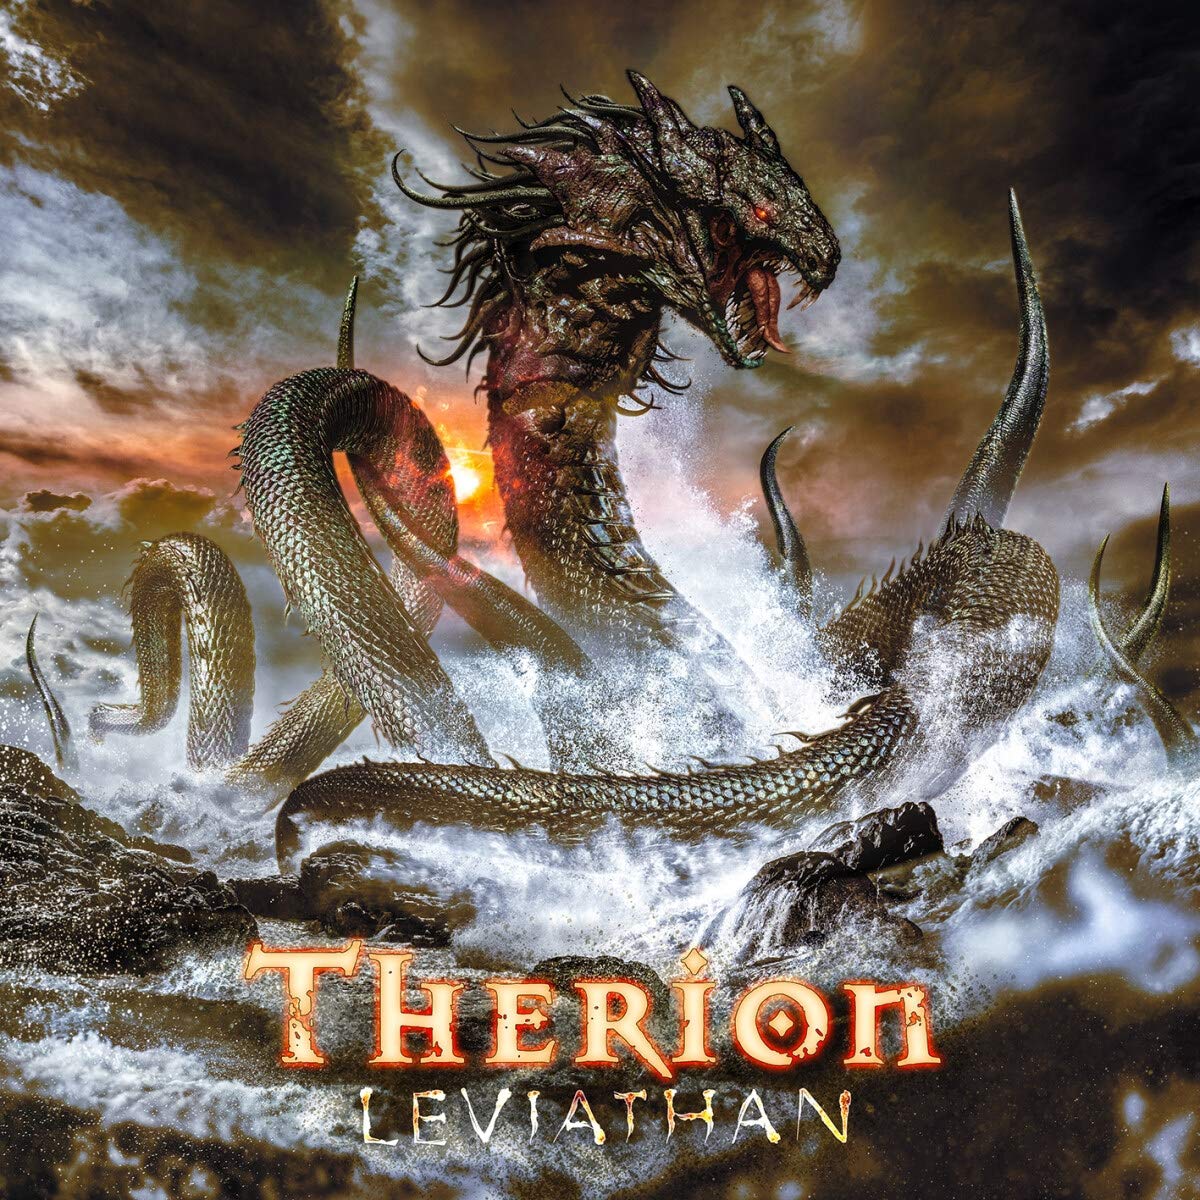 Therion - Leviathan - CD - New